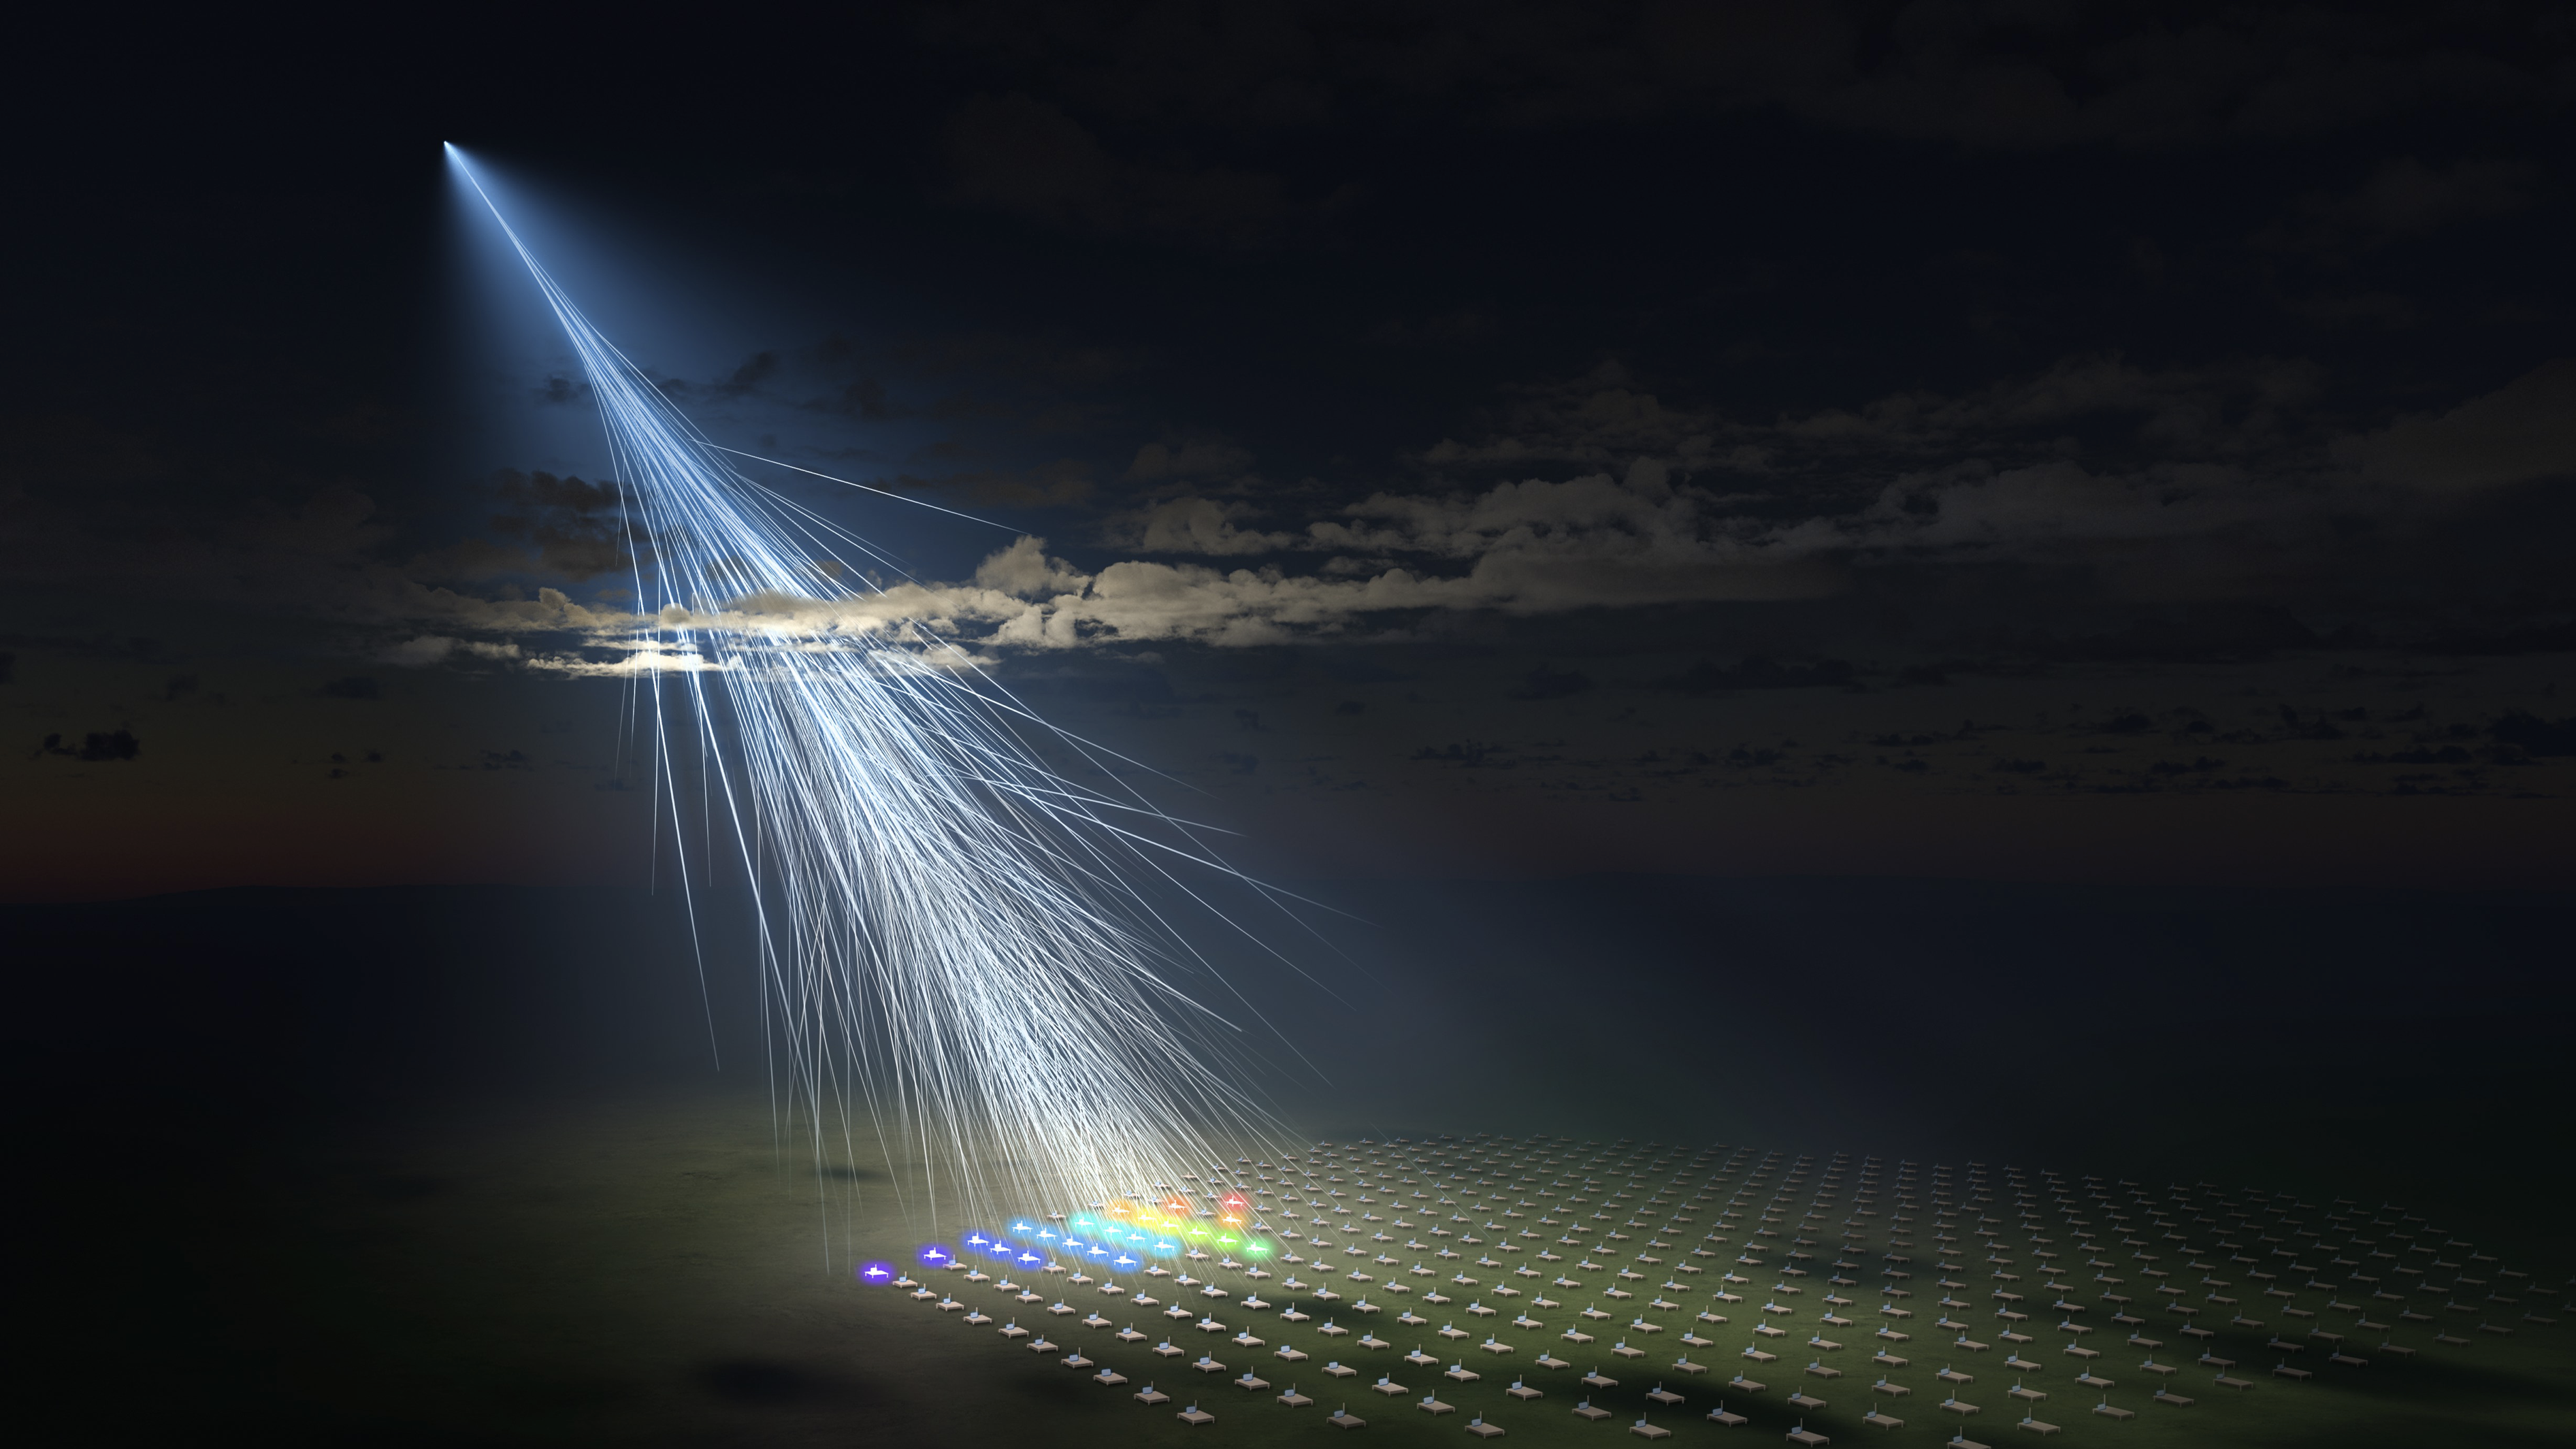 High-energy ‘sun goddess’ particle opens possibilities for new physics, exciting scientists